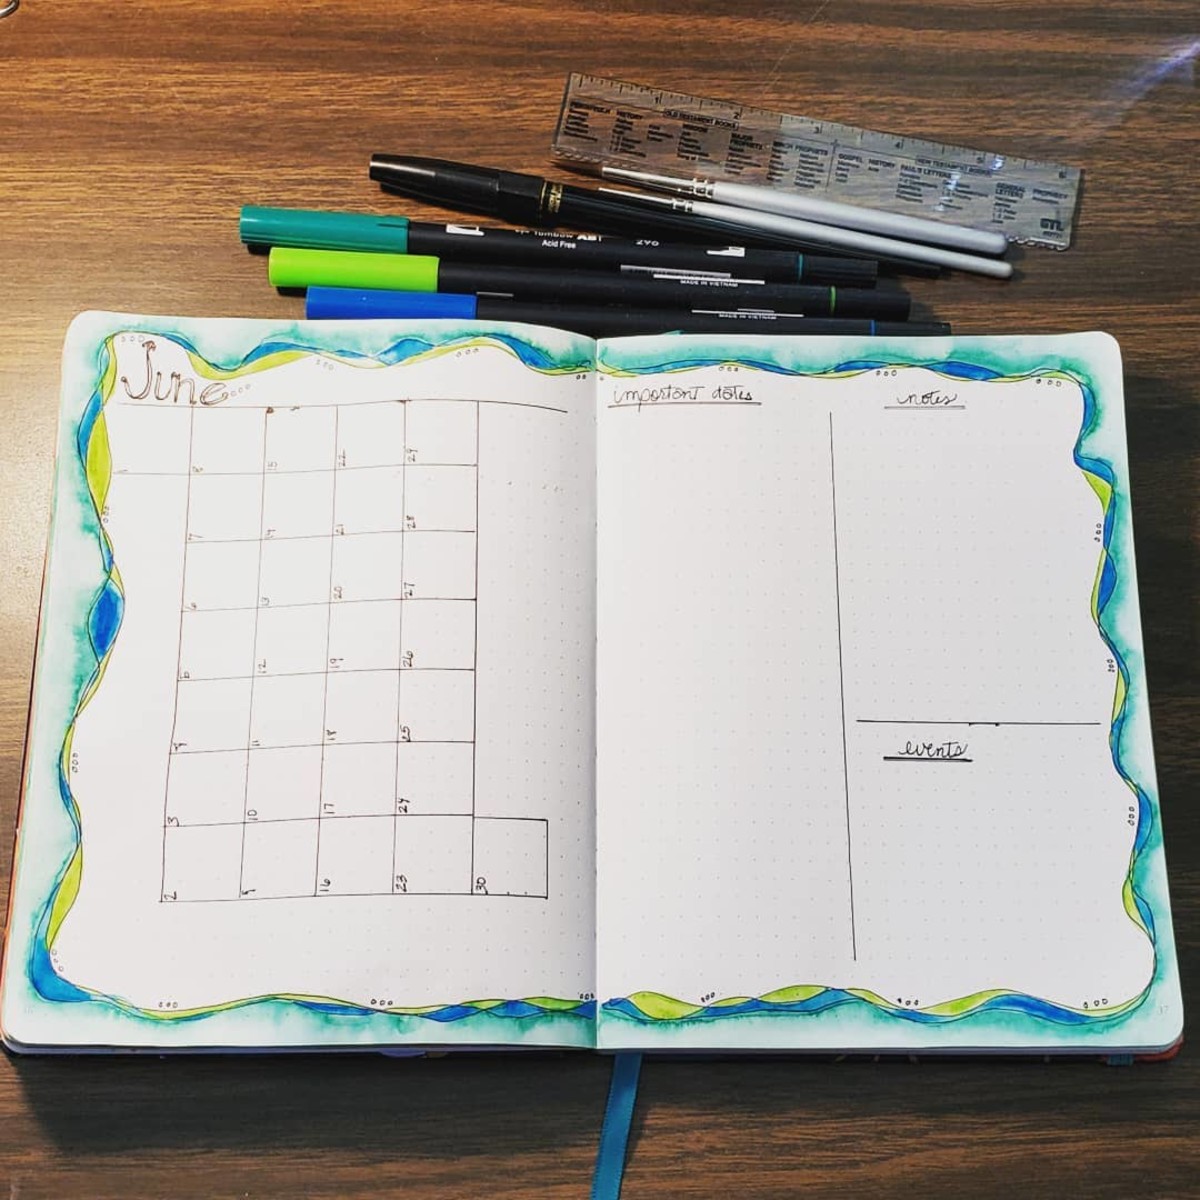 This bullet journal page uses Tombow dual brush pens, a carbon pen, and paint brushes to add water.